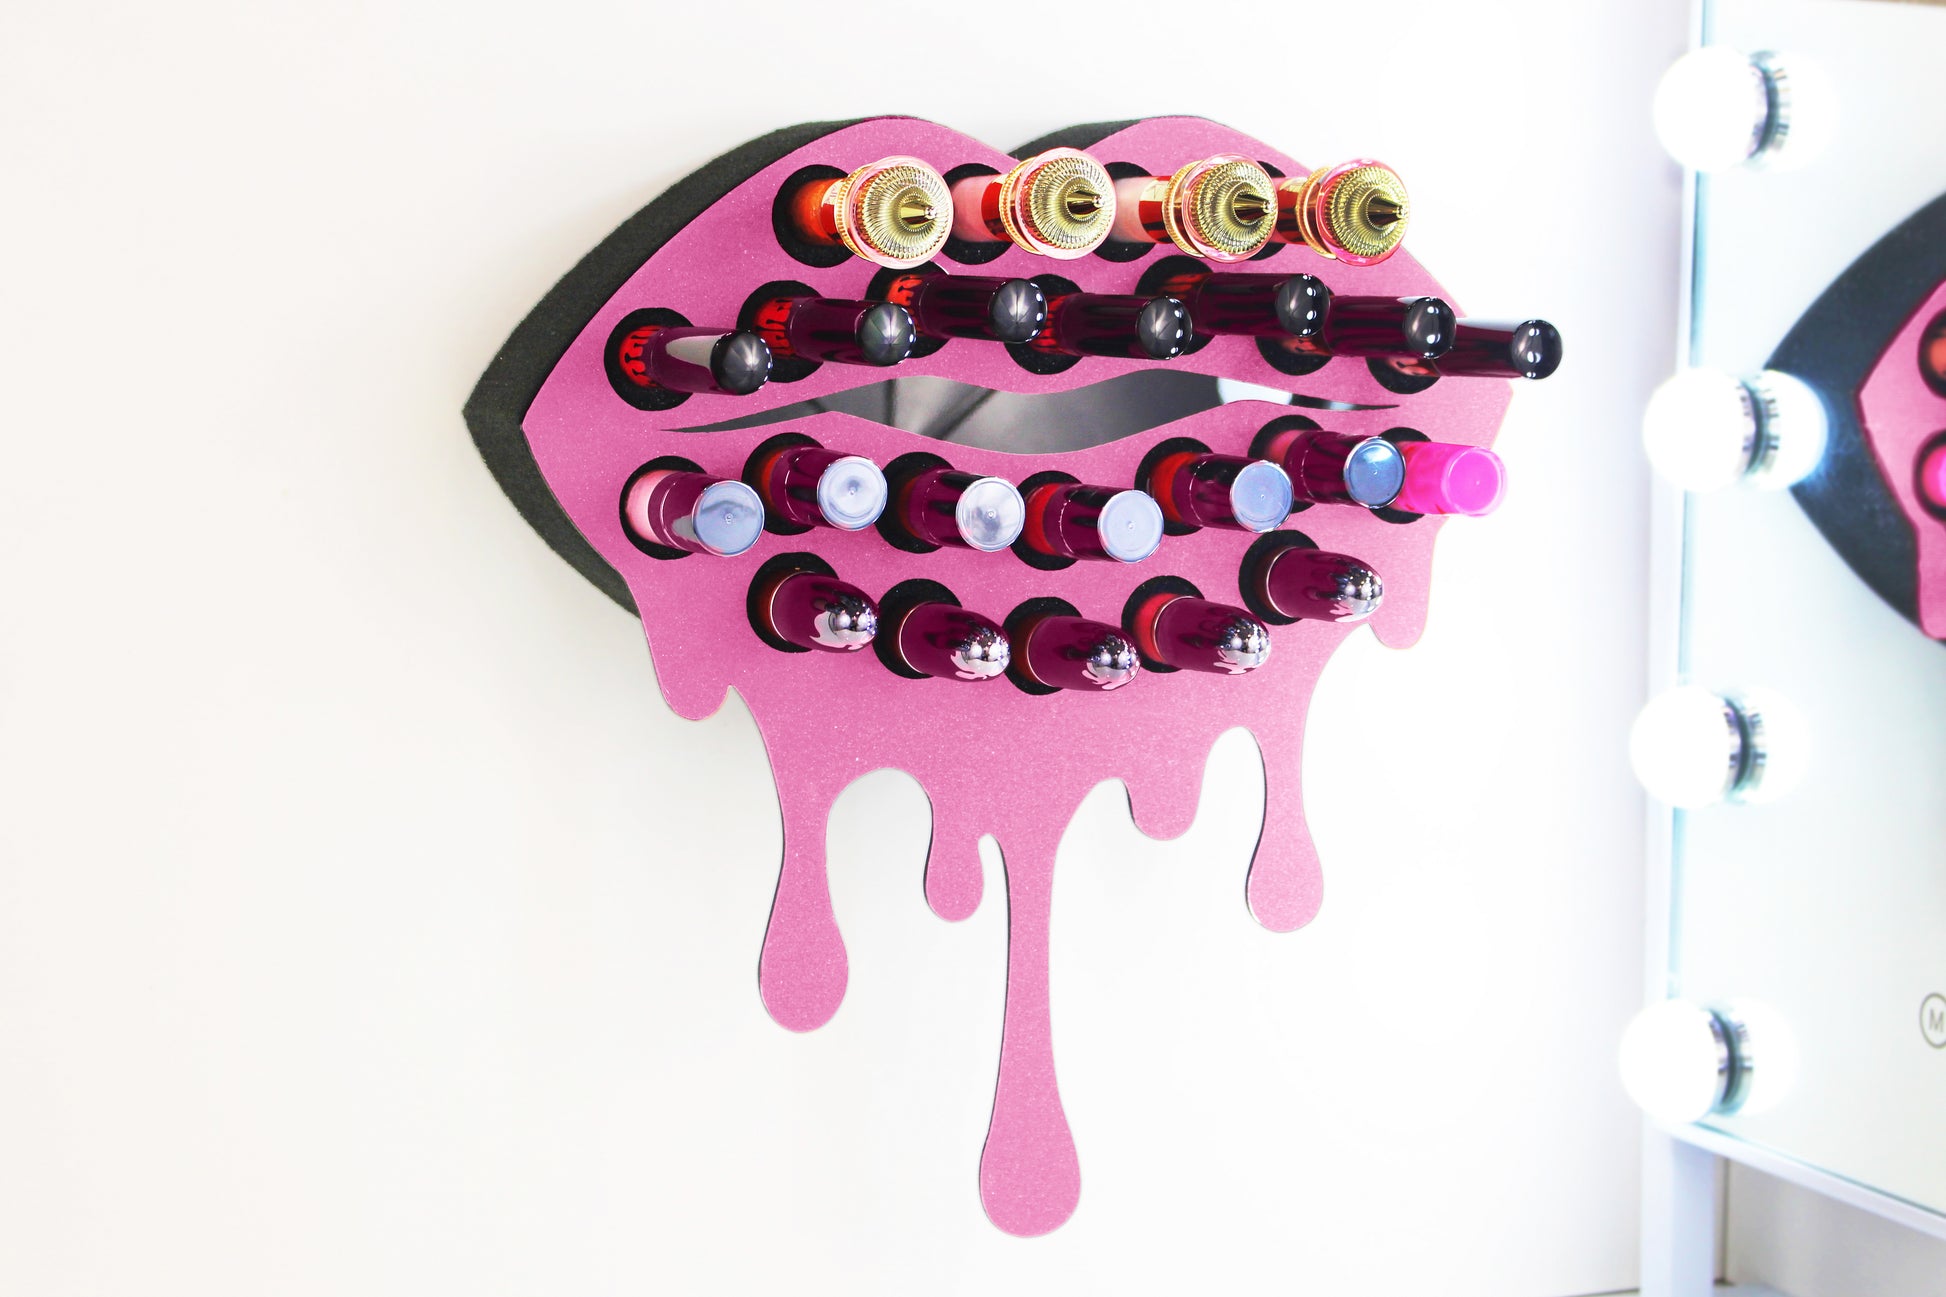 Light Pink Medium Lip Design Lipstick Organizer holding 23 lipsticks mounted on the wall, keeping lipstick organized and easy to reach. This wall mounted makeup organizer looks like art on the wall of your bathroom or makeup room.